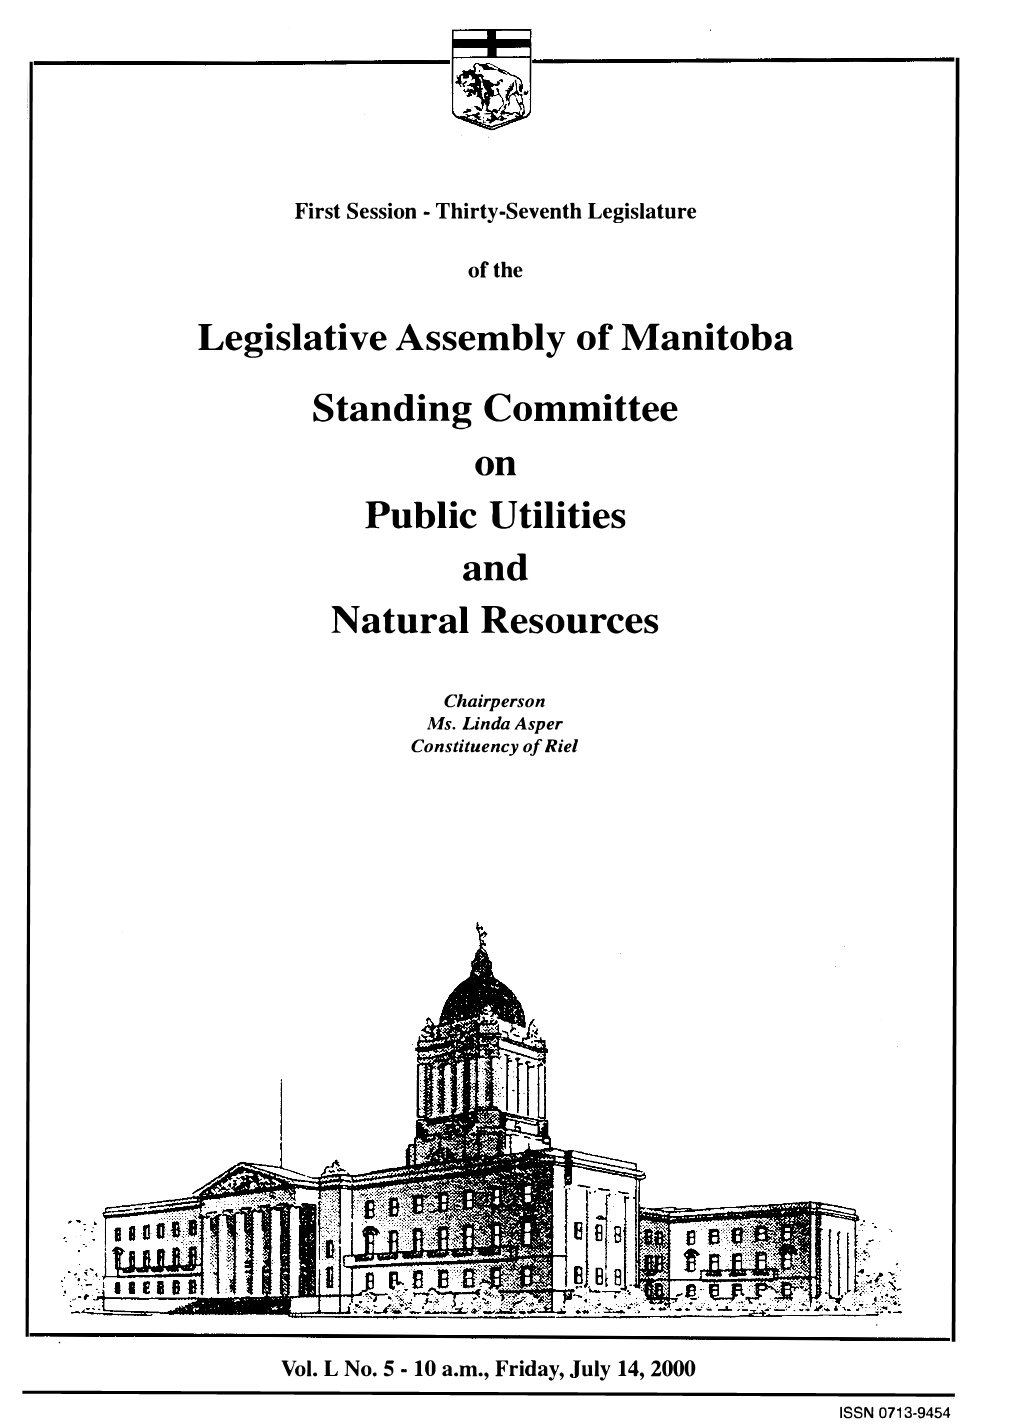 Legislative Assembly of Manitoba Standing Committee on Public Utilities and Natural Resources